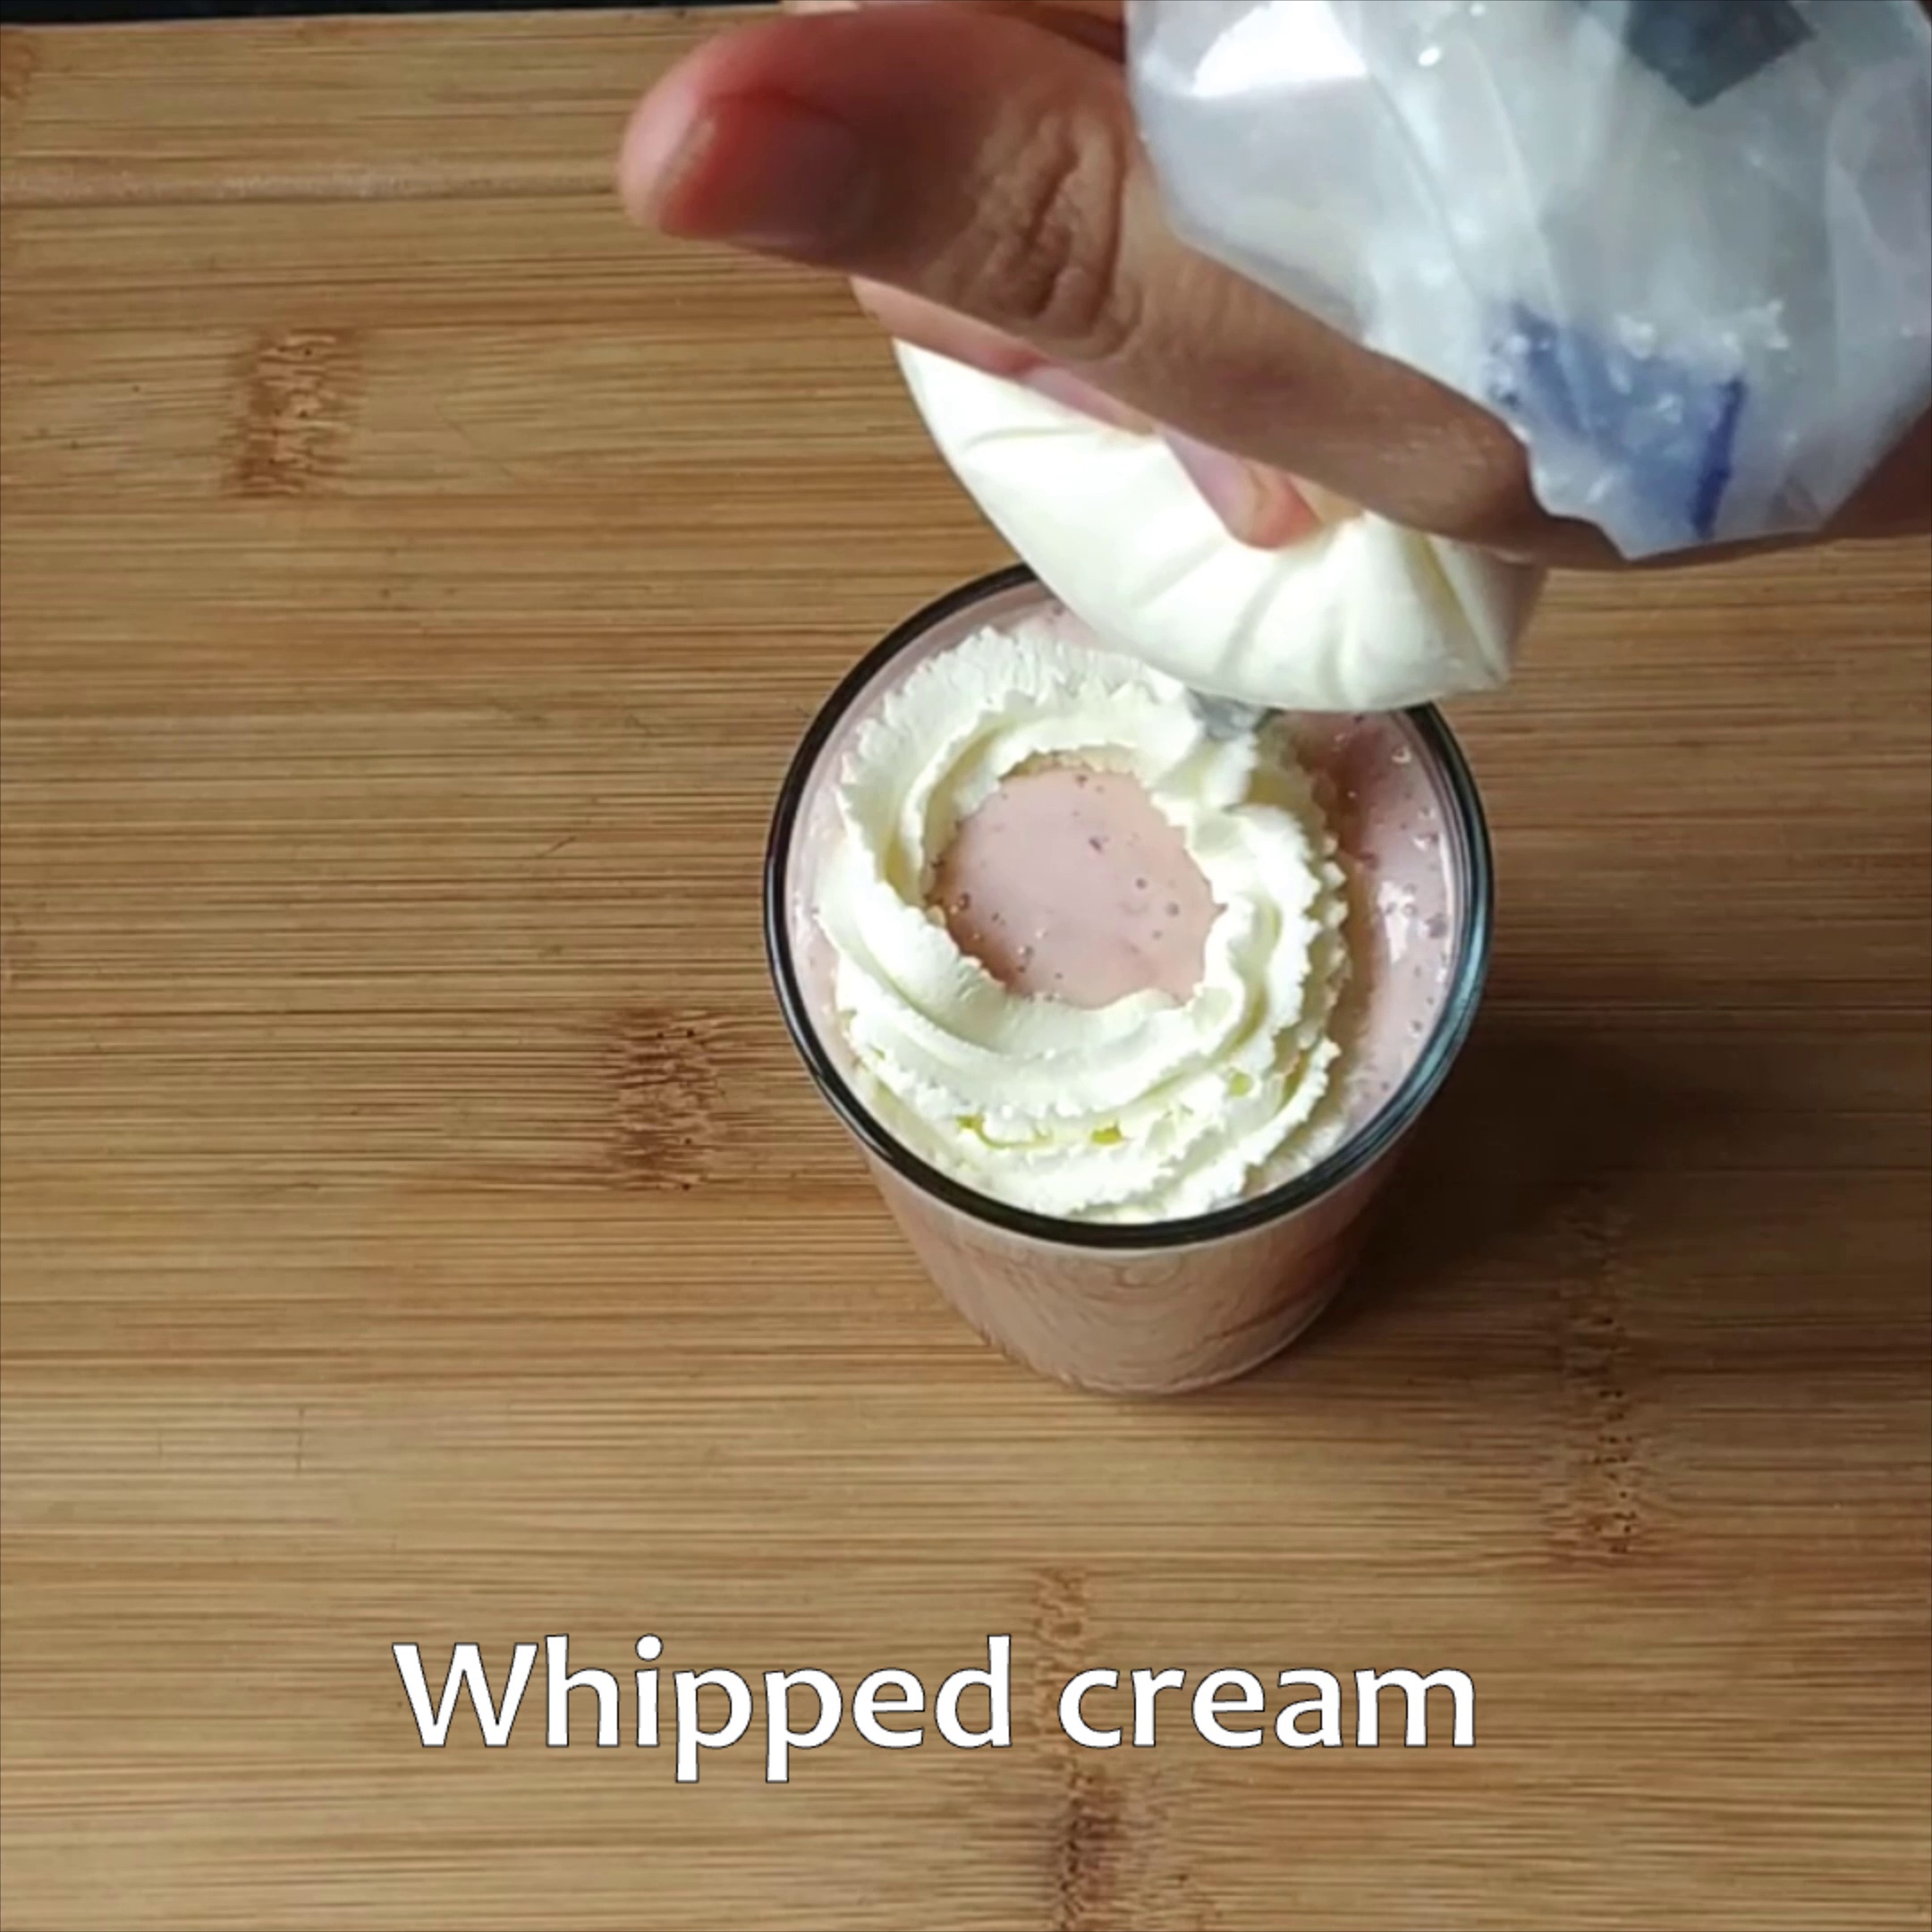 Step 6 - Top with a swirl of whipped cream and fresh strawberry.